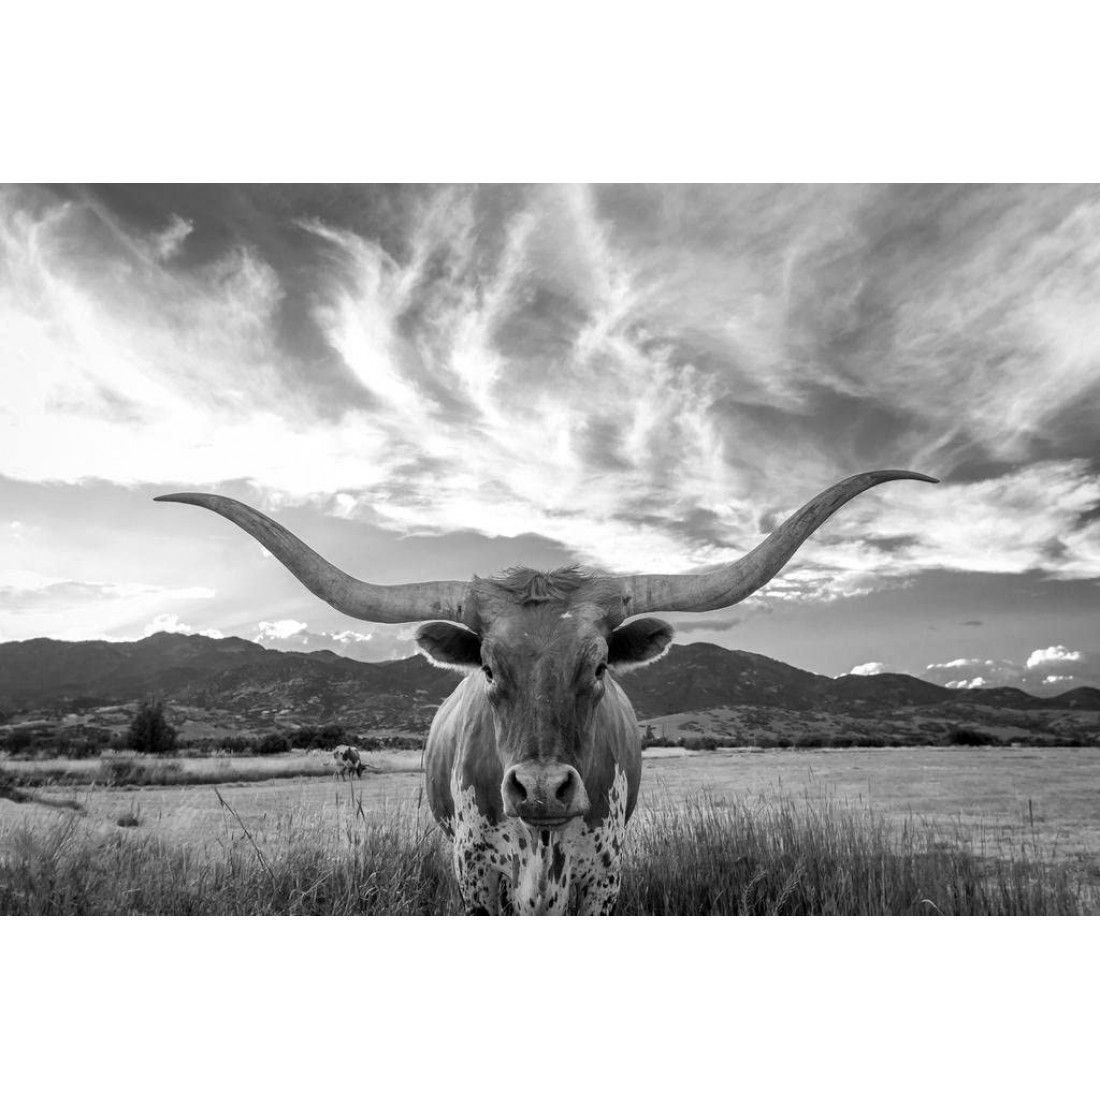 Texas Longhorn Bull Standing In Pasture Wall Decor Art Poster Inside Most Current Long Horn Wall Art (View 9 of 20)